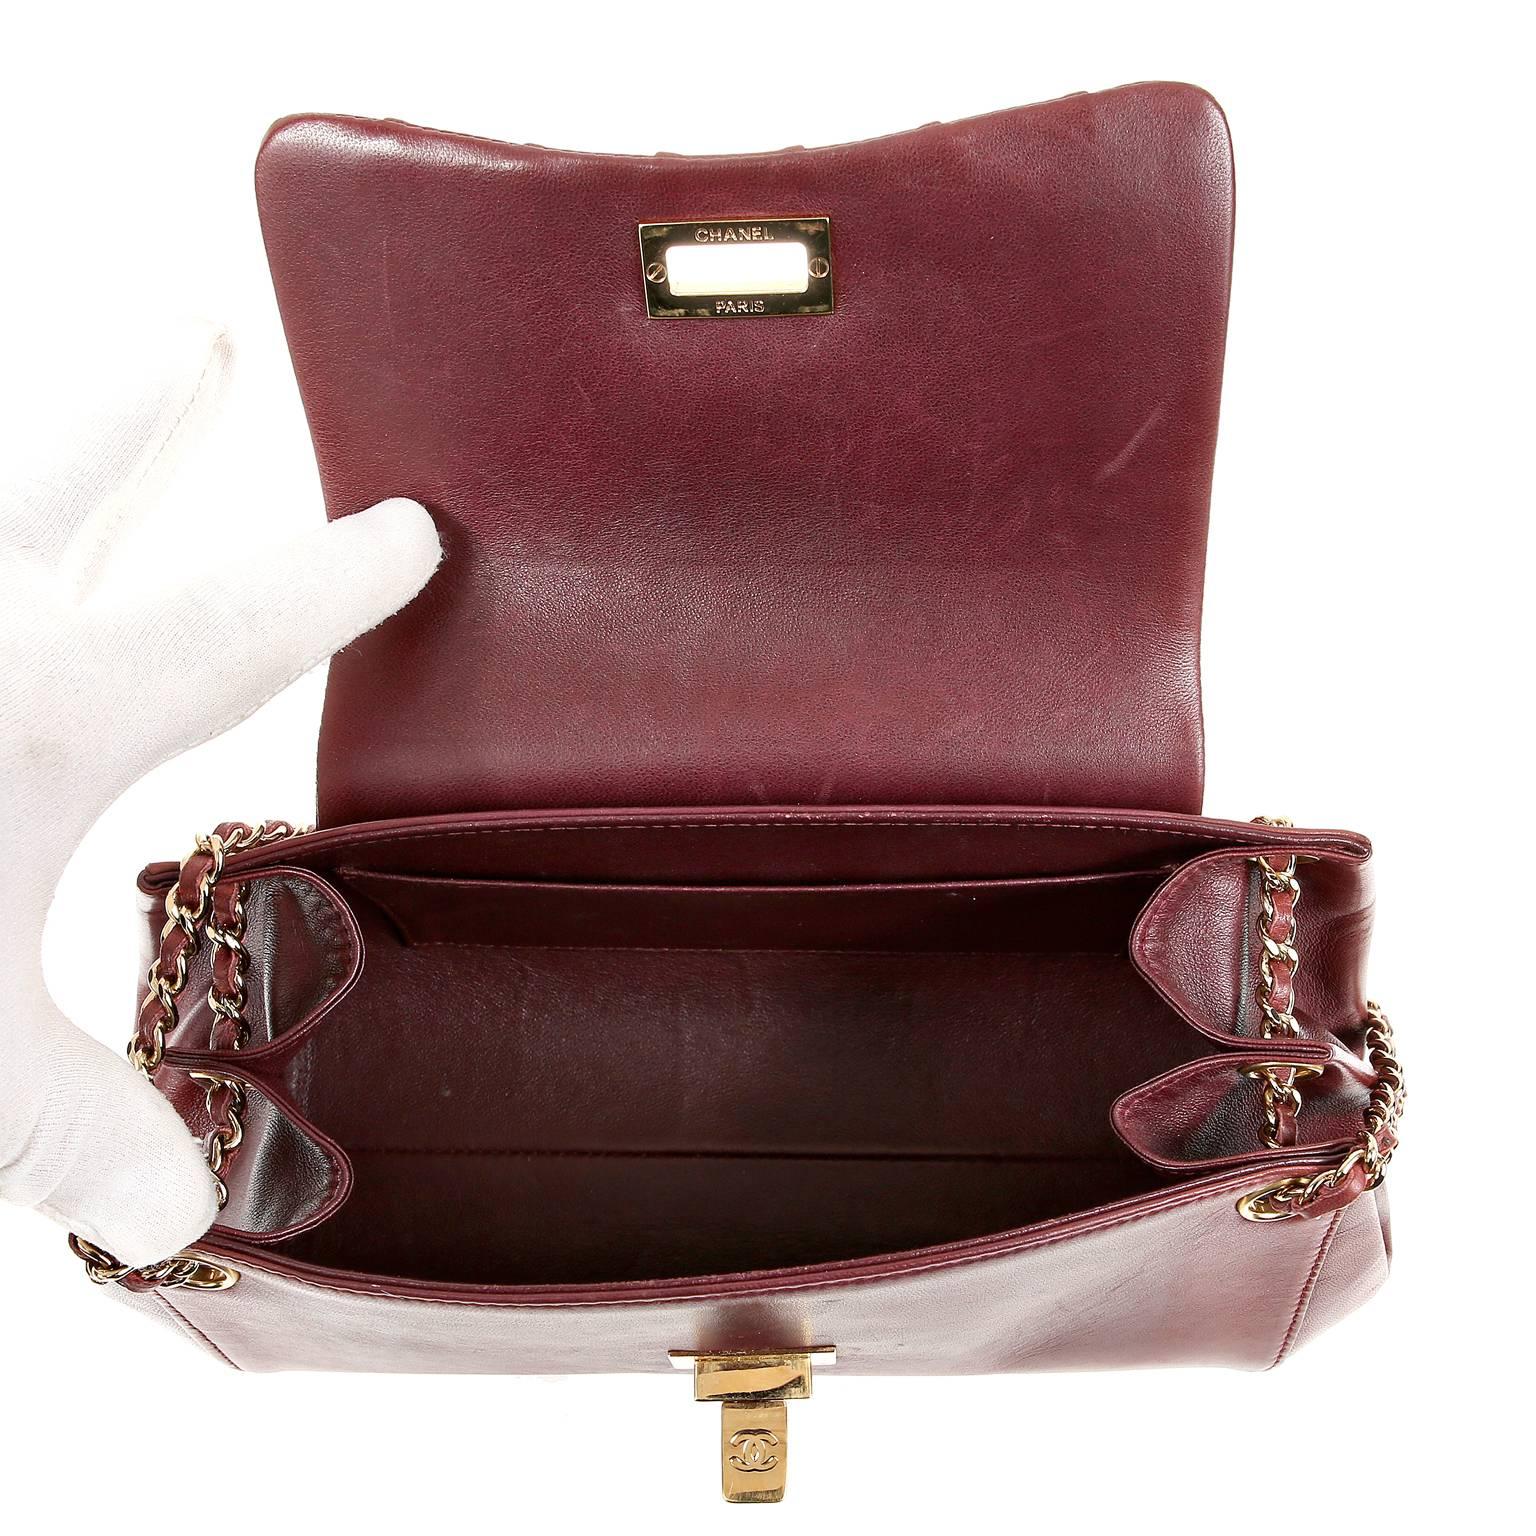 Chanel Burgundy Leather  Accordion Flap Bag For Sale 2